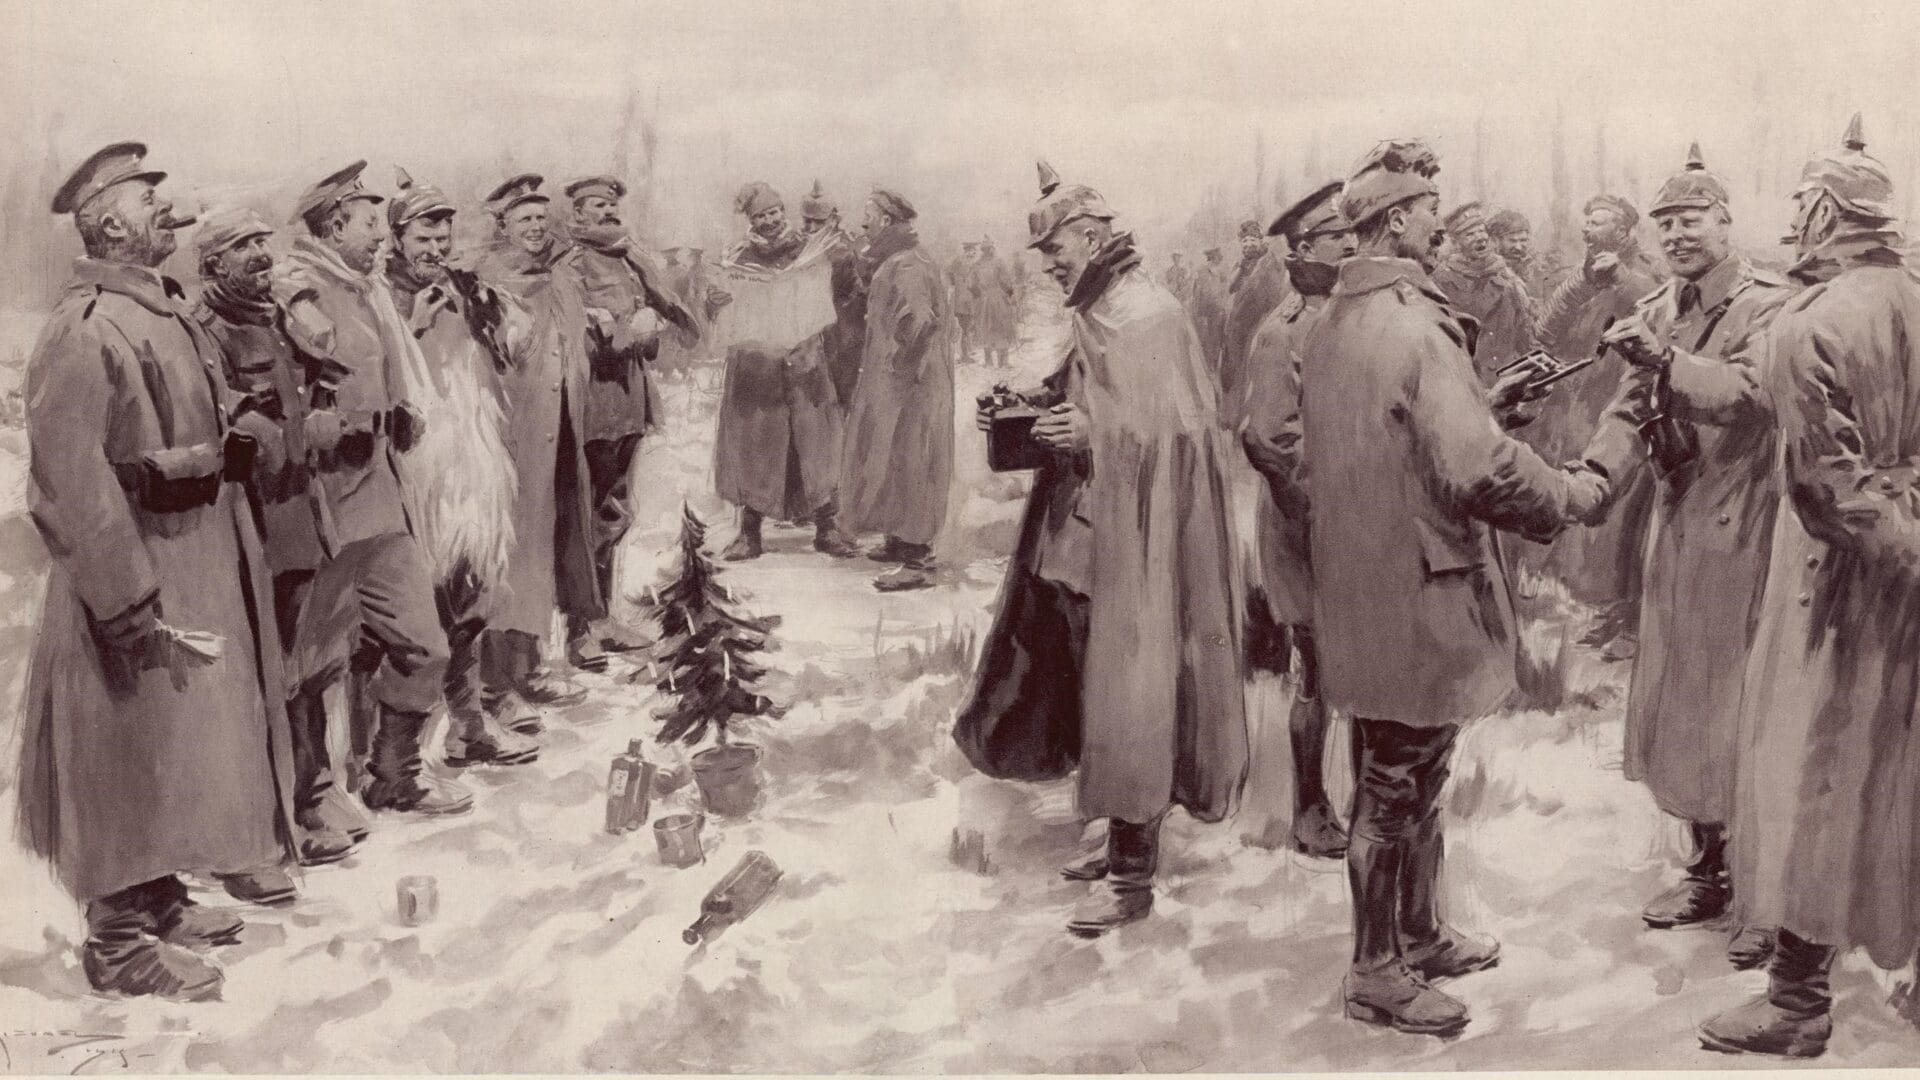 The Illustrated London News's illustration of the Christmas Truce: "British and German Soldiers Arm-in-Arm Exchanging Headgear: A Christmas Truce between Opposing Trenches" The subcaption reads "Saxons and Anglo-Saxons fraternising on the field of battle at the season of peace and goodwill: Officers and men from the German and British trenches meet and greet one another—A German officer photographing a group of foes and friends."